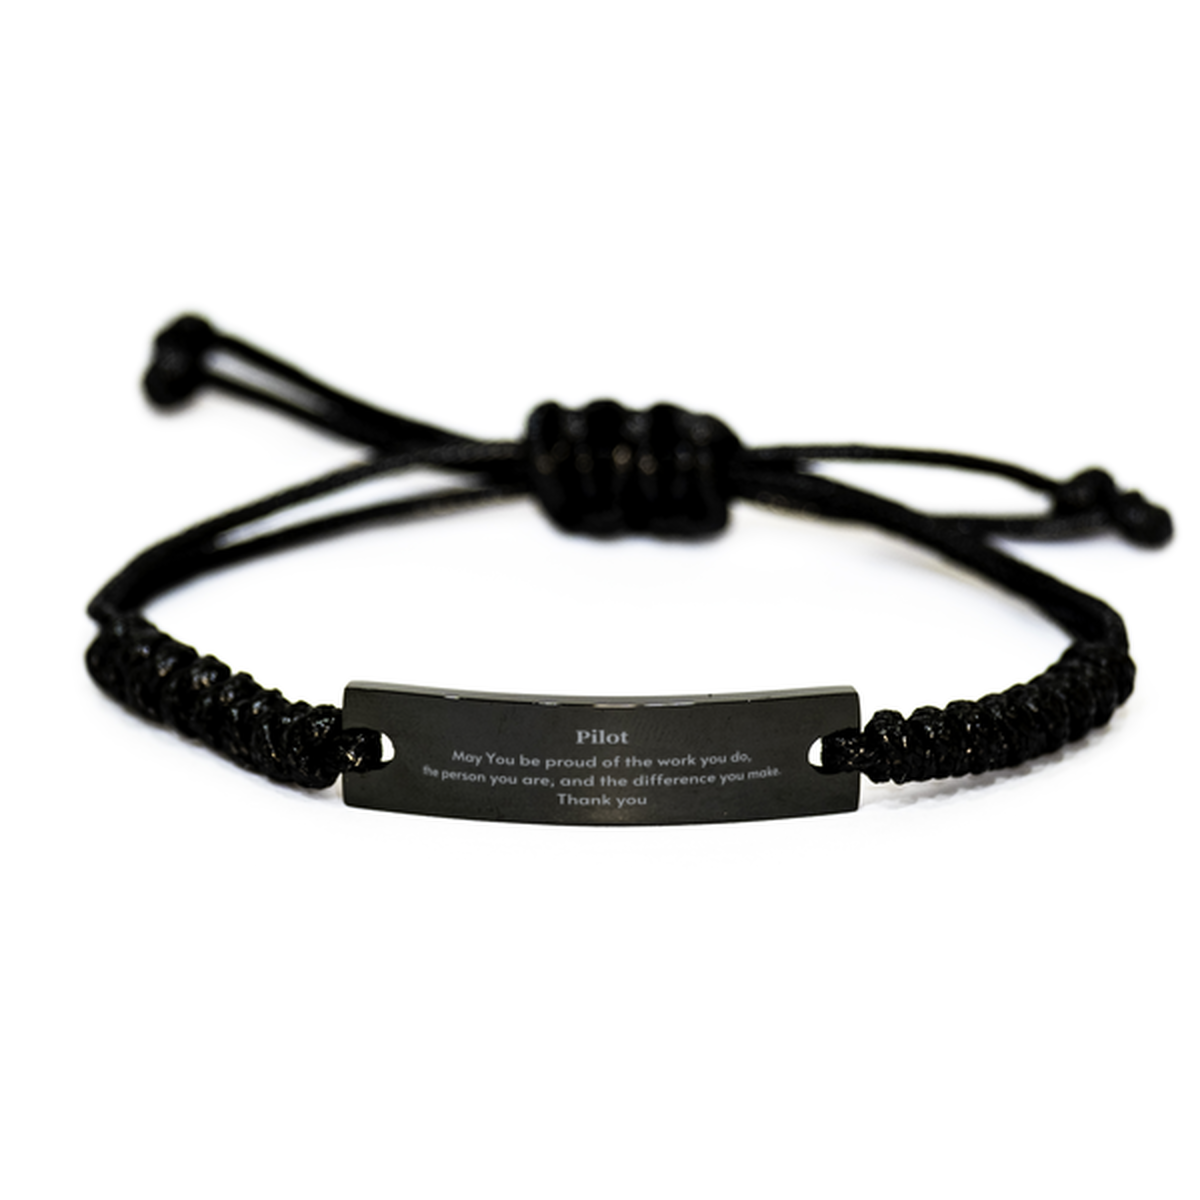 Heartwarming Black Rope Bracelet Retirement Coworkers Gifts for Pilot, Pilot May You be proud of the work you do, the person you are Gifts for Boss Men Women Friends